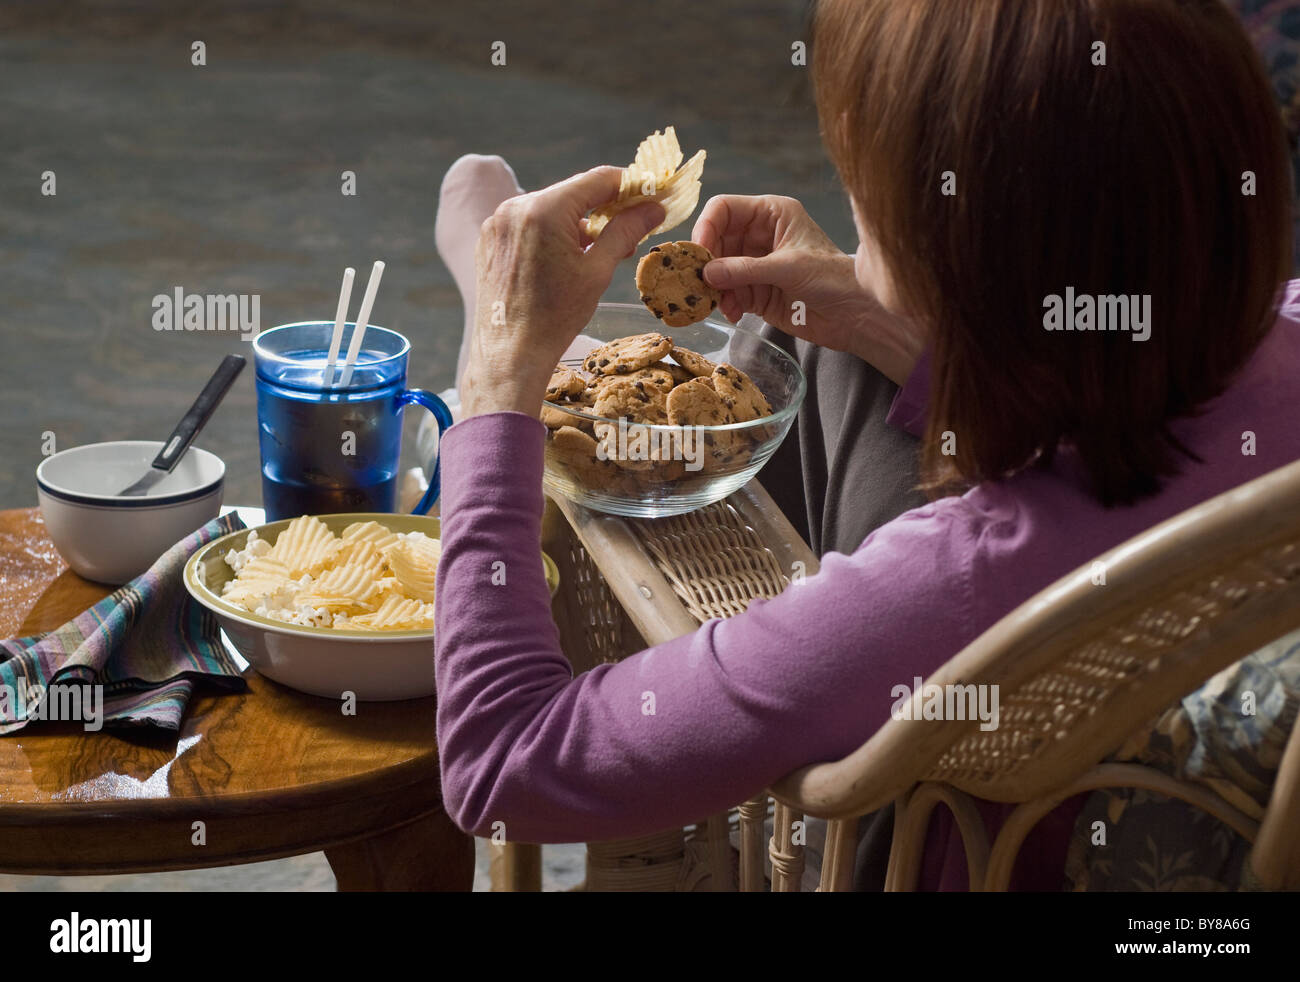 woman seated eating junk food Stock Photo